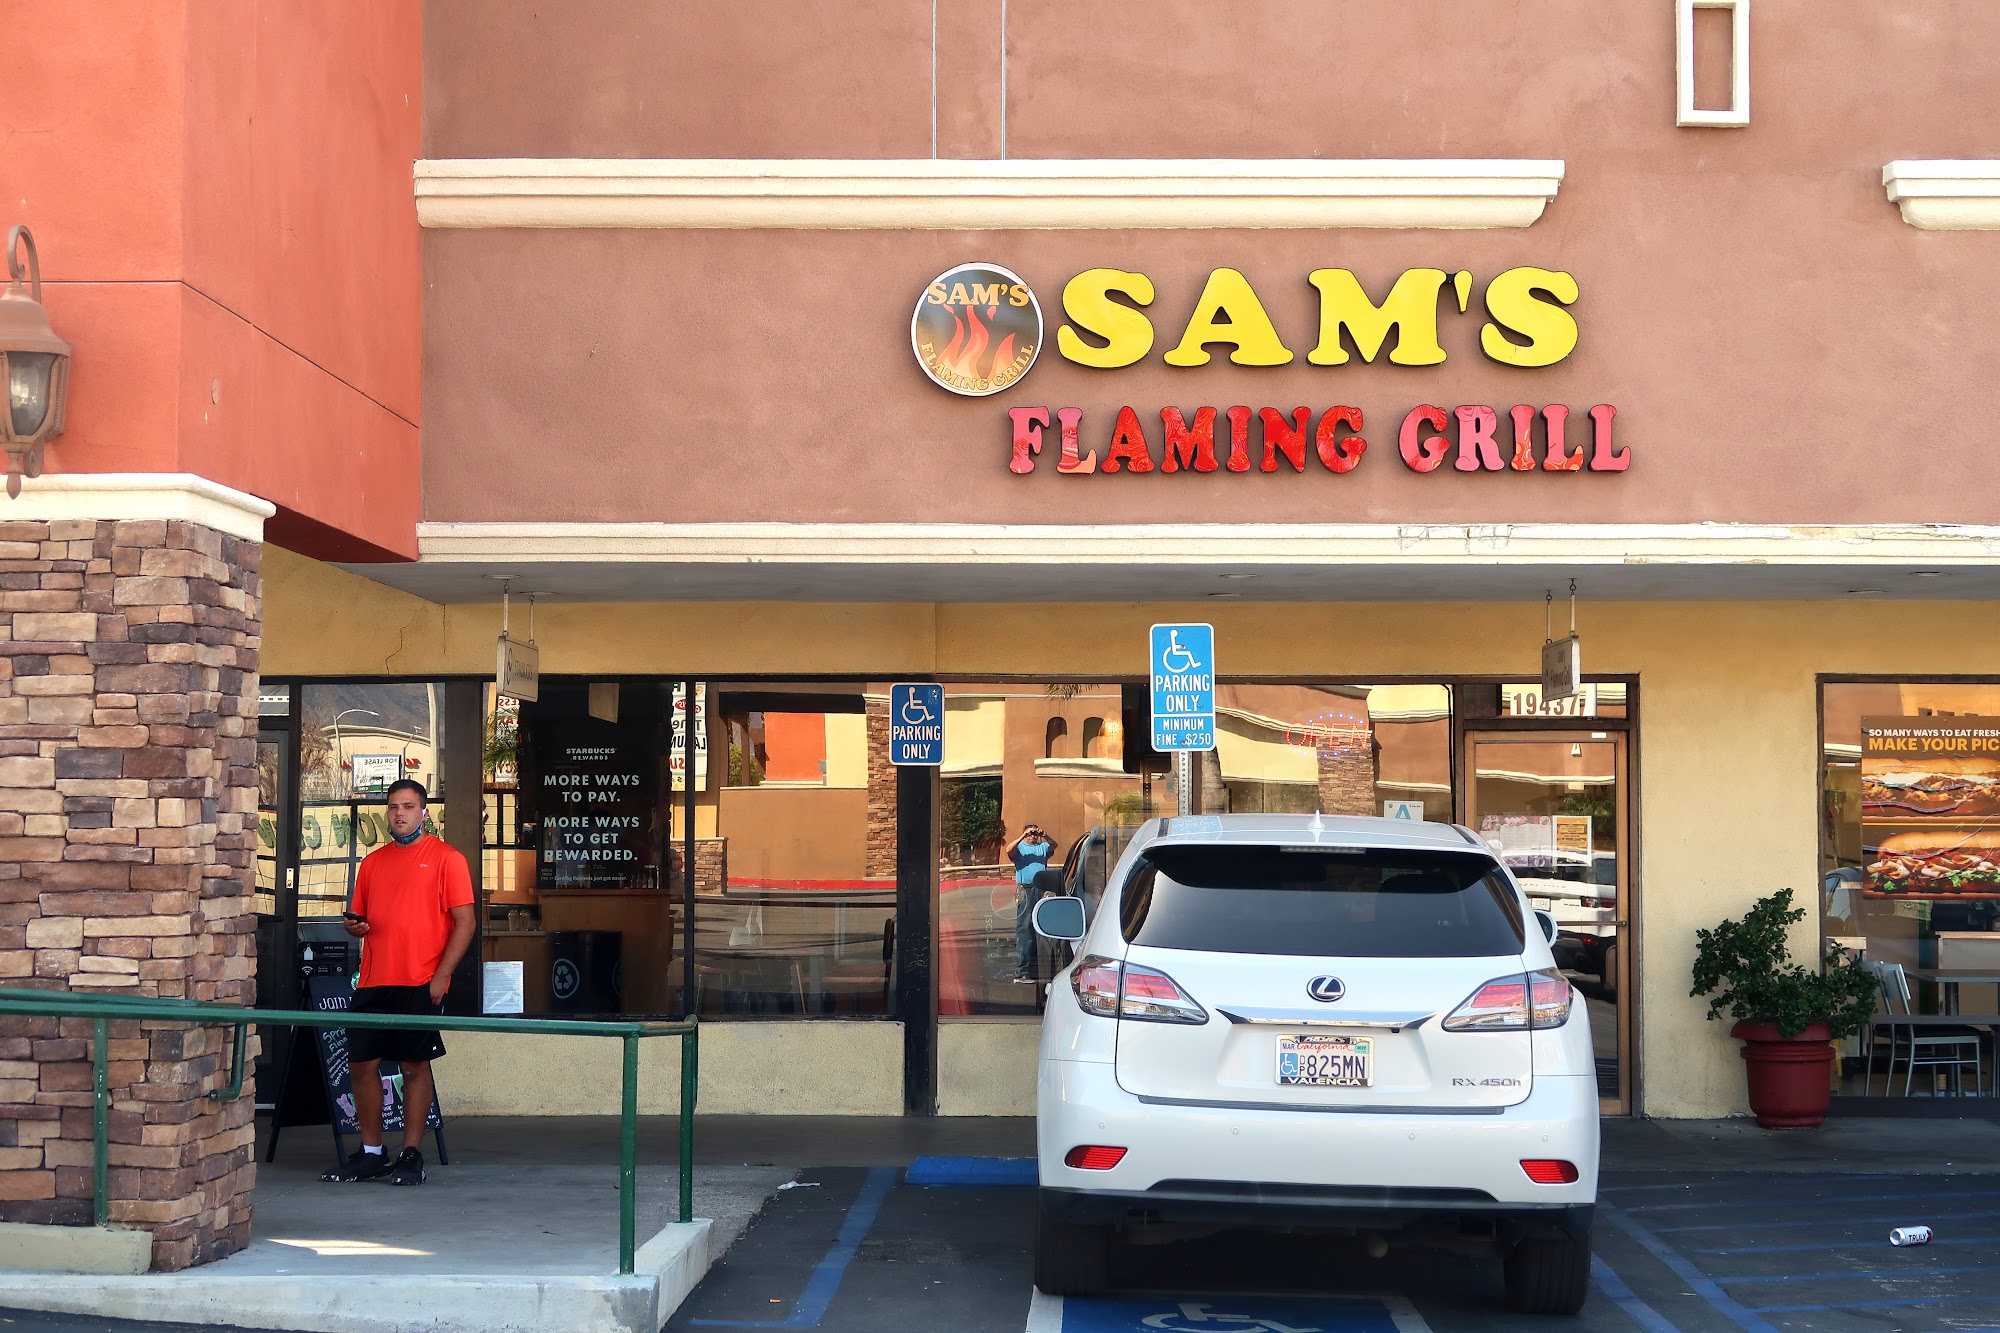 Sam’s Flaming Grill